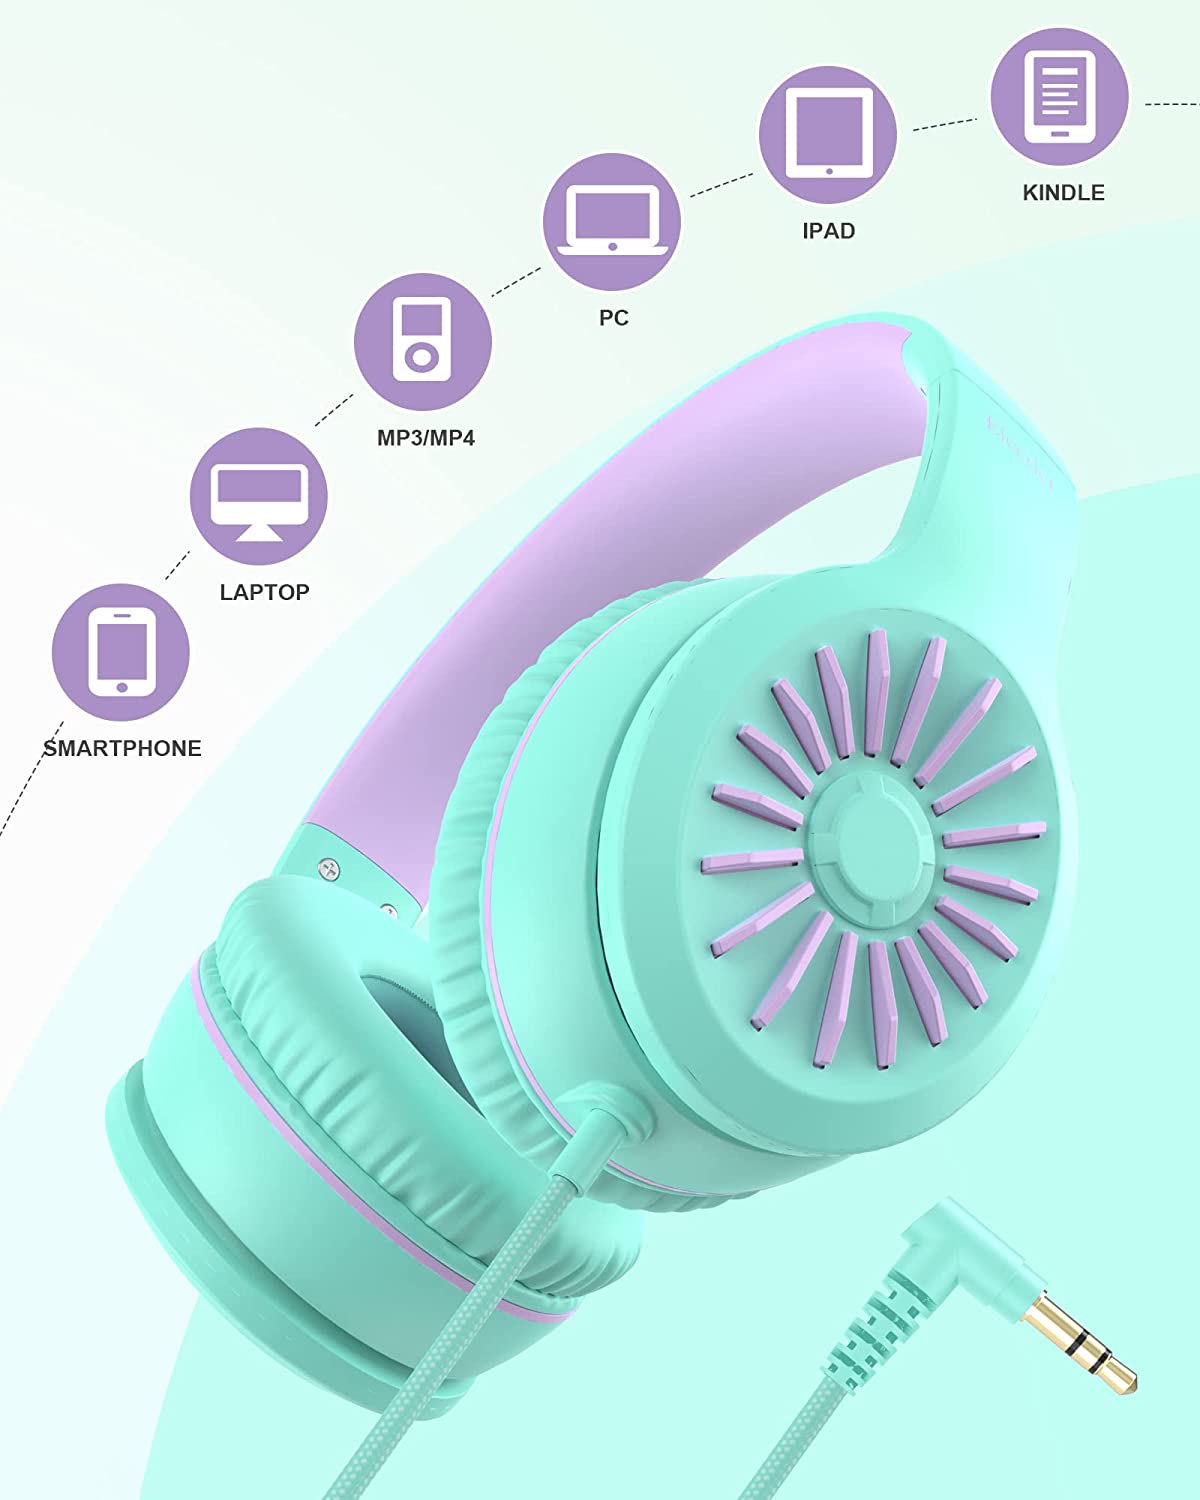 Elecder i45 On-Ear Headphones with Microphone for Kids and Adults 4 colors